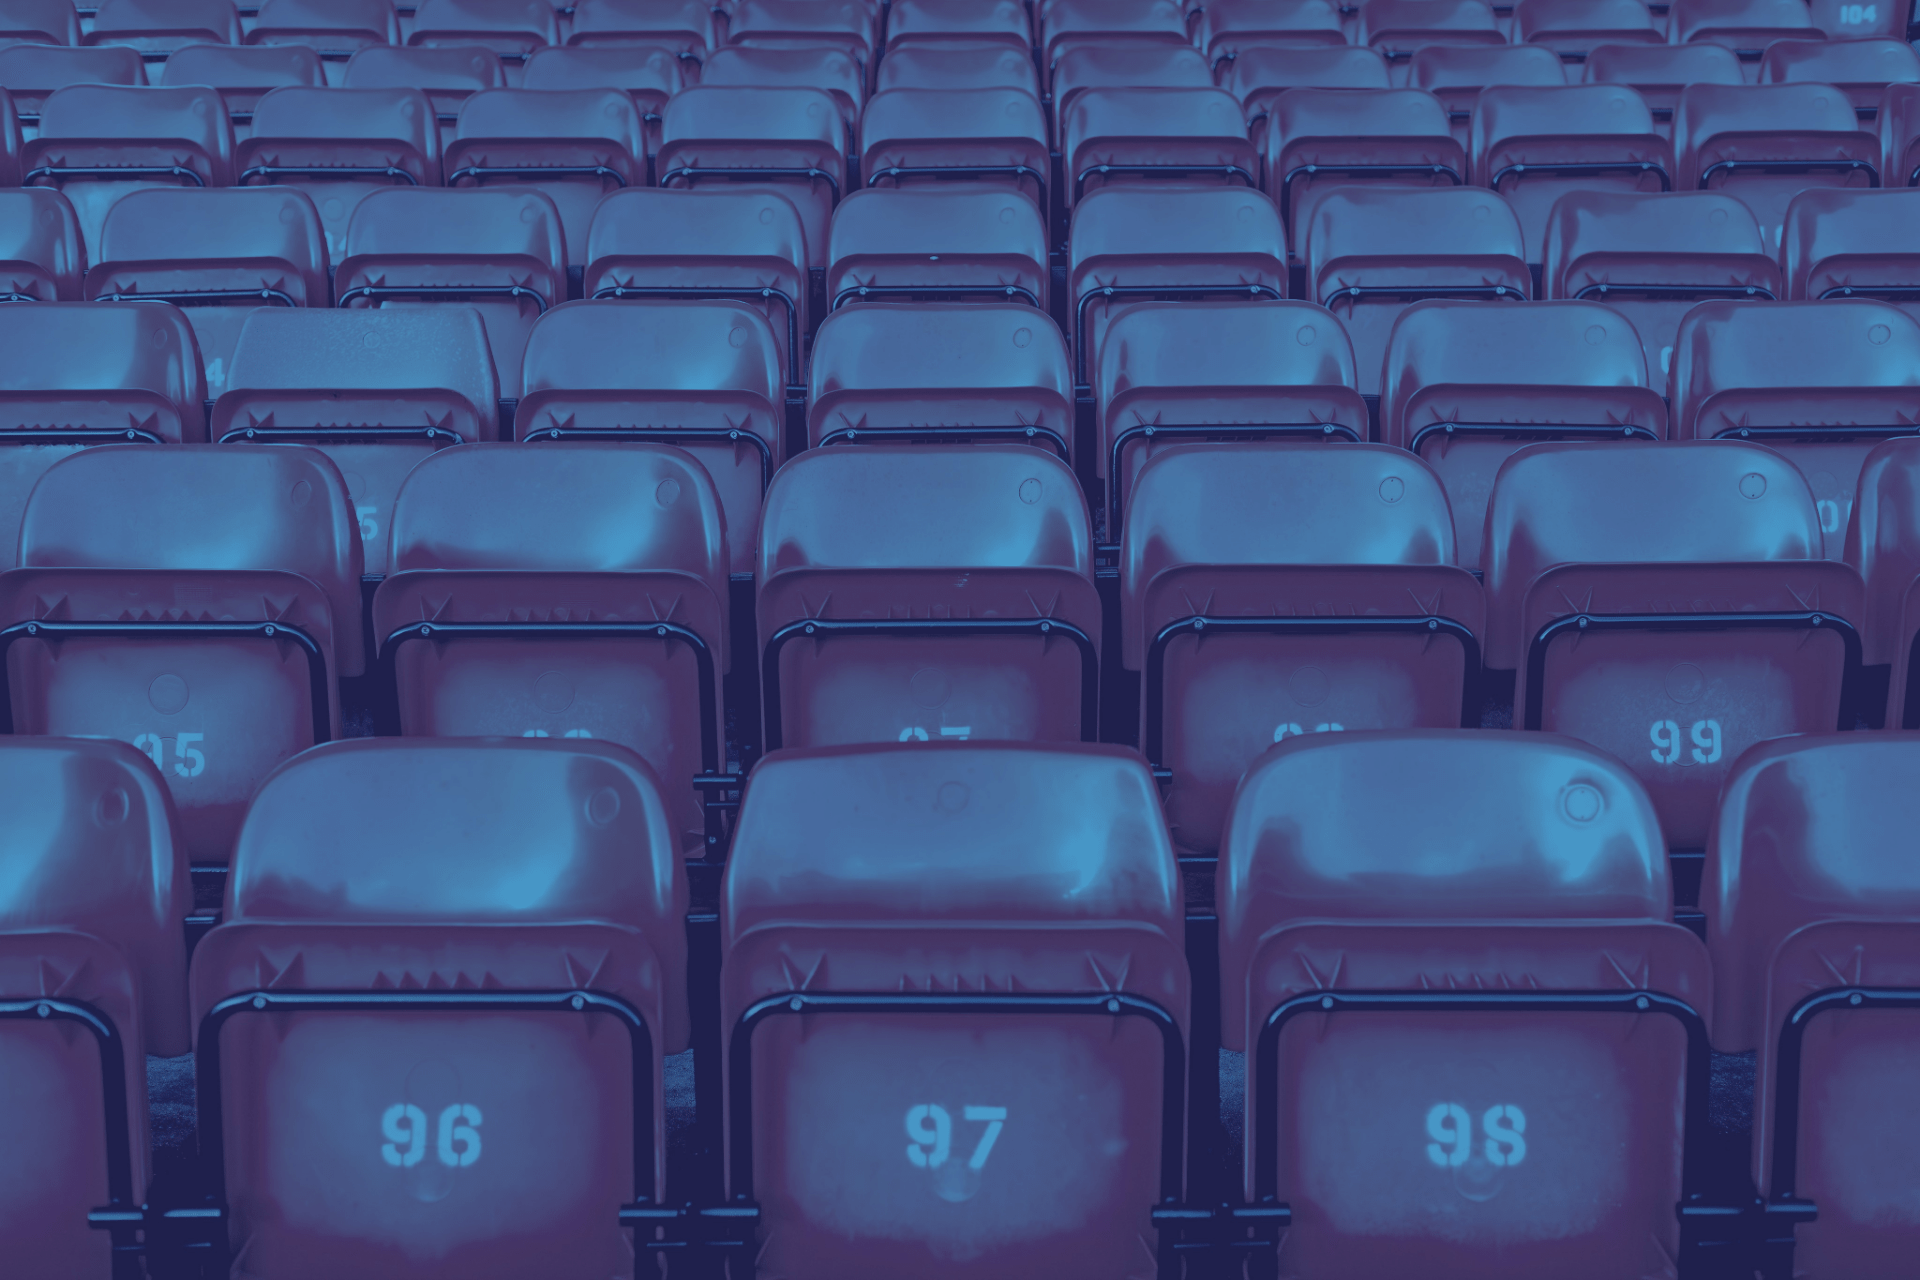 The Ultimate Guide to Capacity Management for Event and Stadium Management in the Time of COVID-19